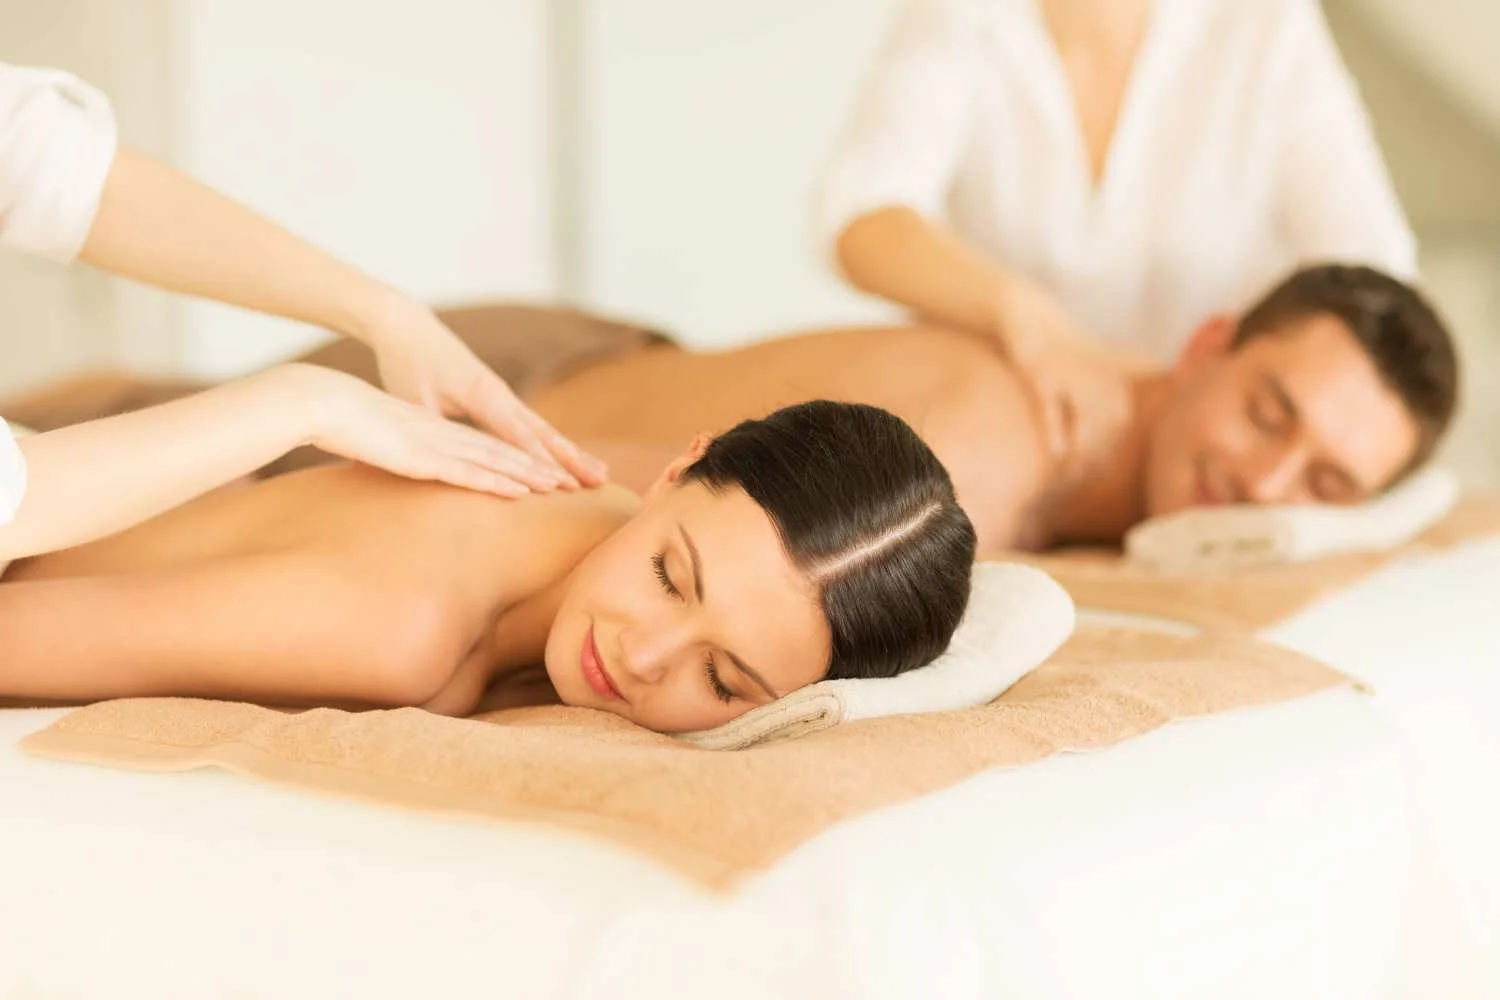 1 day massages and treatments, spa retreat sensations in coimbra, portugal391713268154.webp